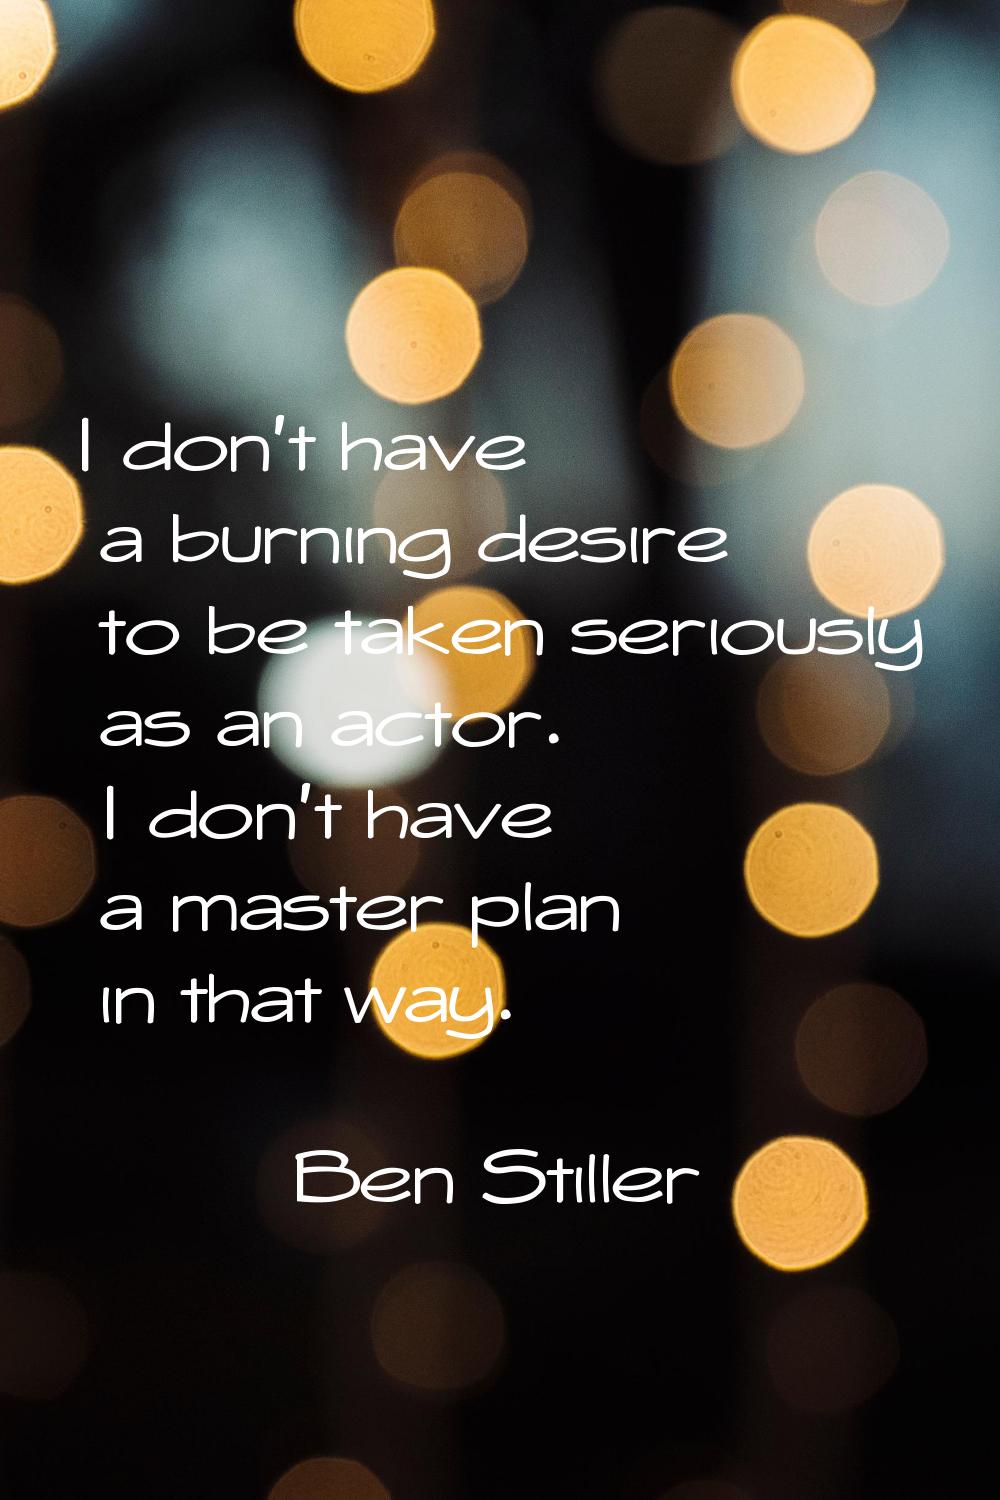 I don't have a burning desire to be taken seriously as an actor. I don't have a master plan in that